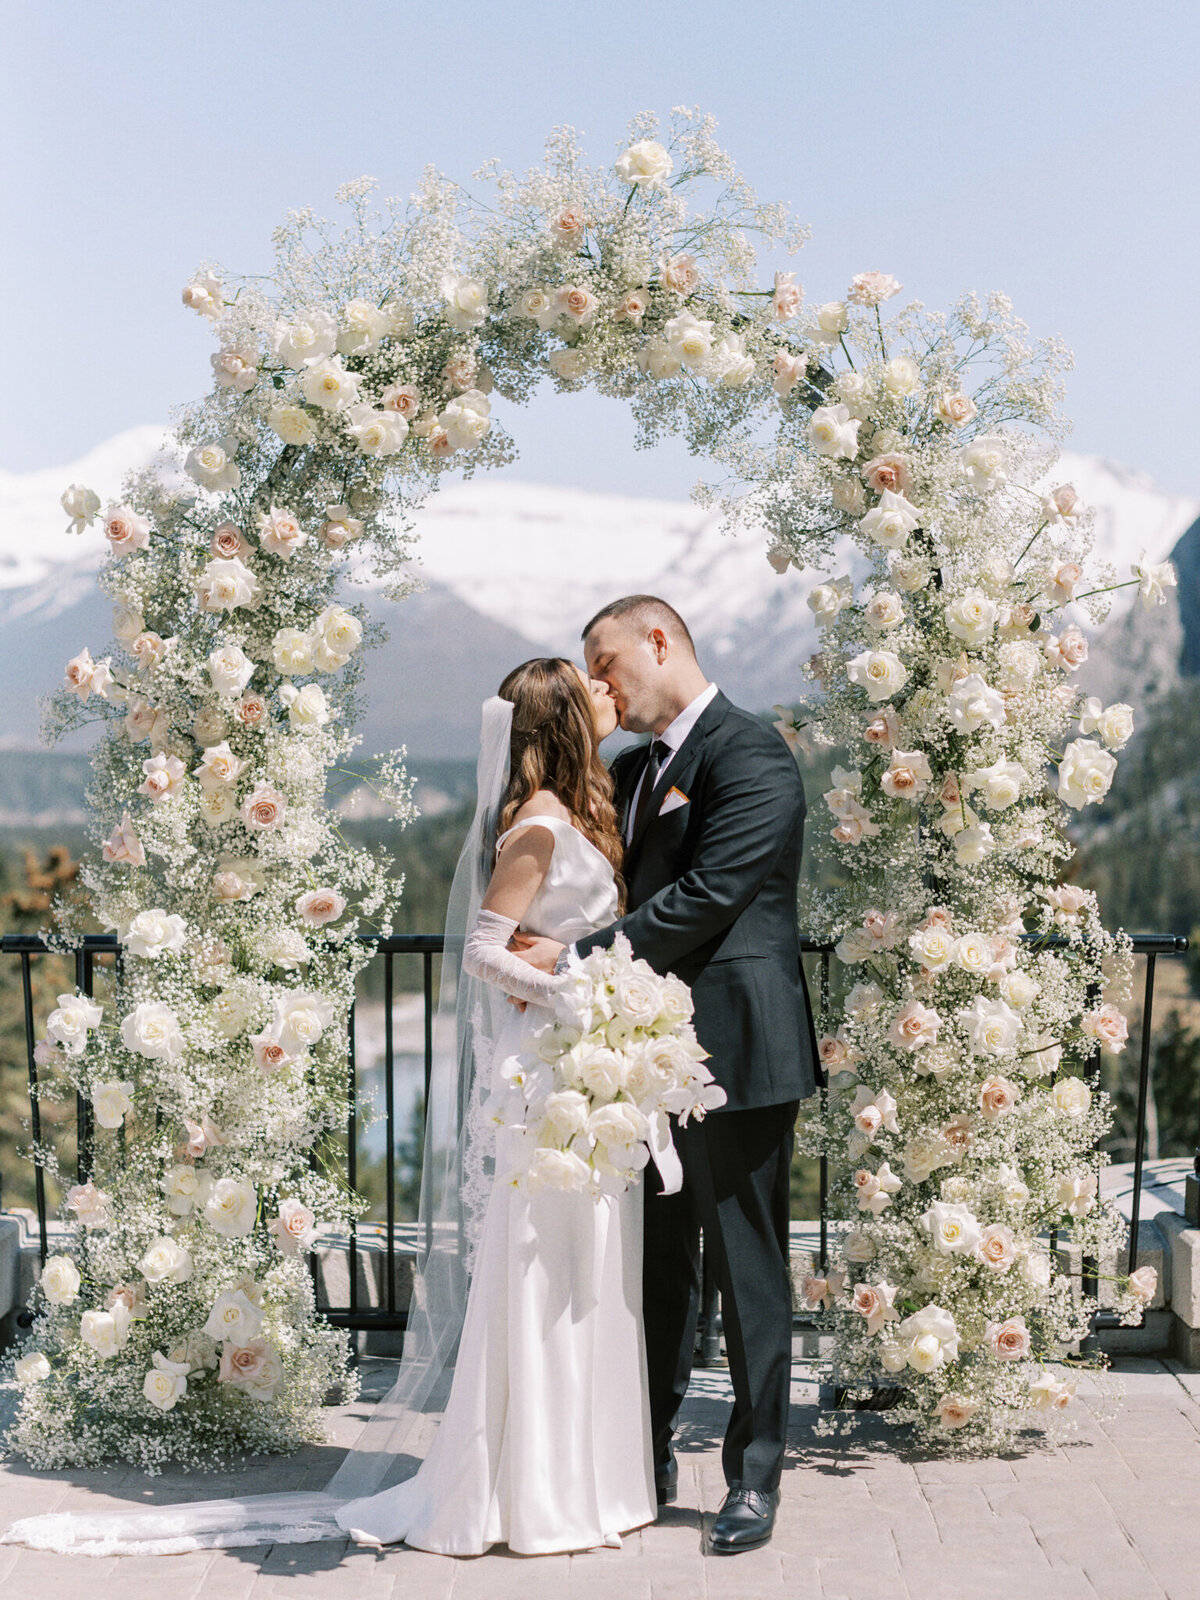 Stunning and romantic ceremony floral arch backdrop by The Romantiks, romantic wedding florals based in Calgary, AB & Cranbrook, BC. Featured on the Brontë Bride Vendor Guide.